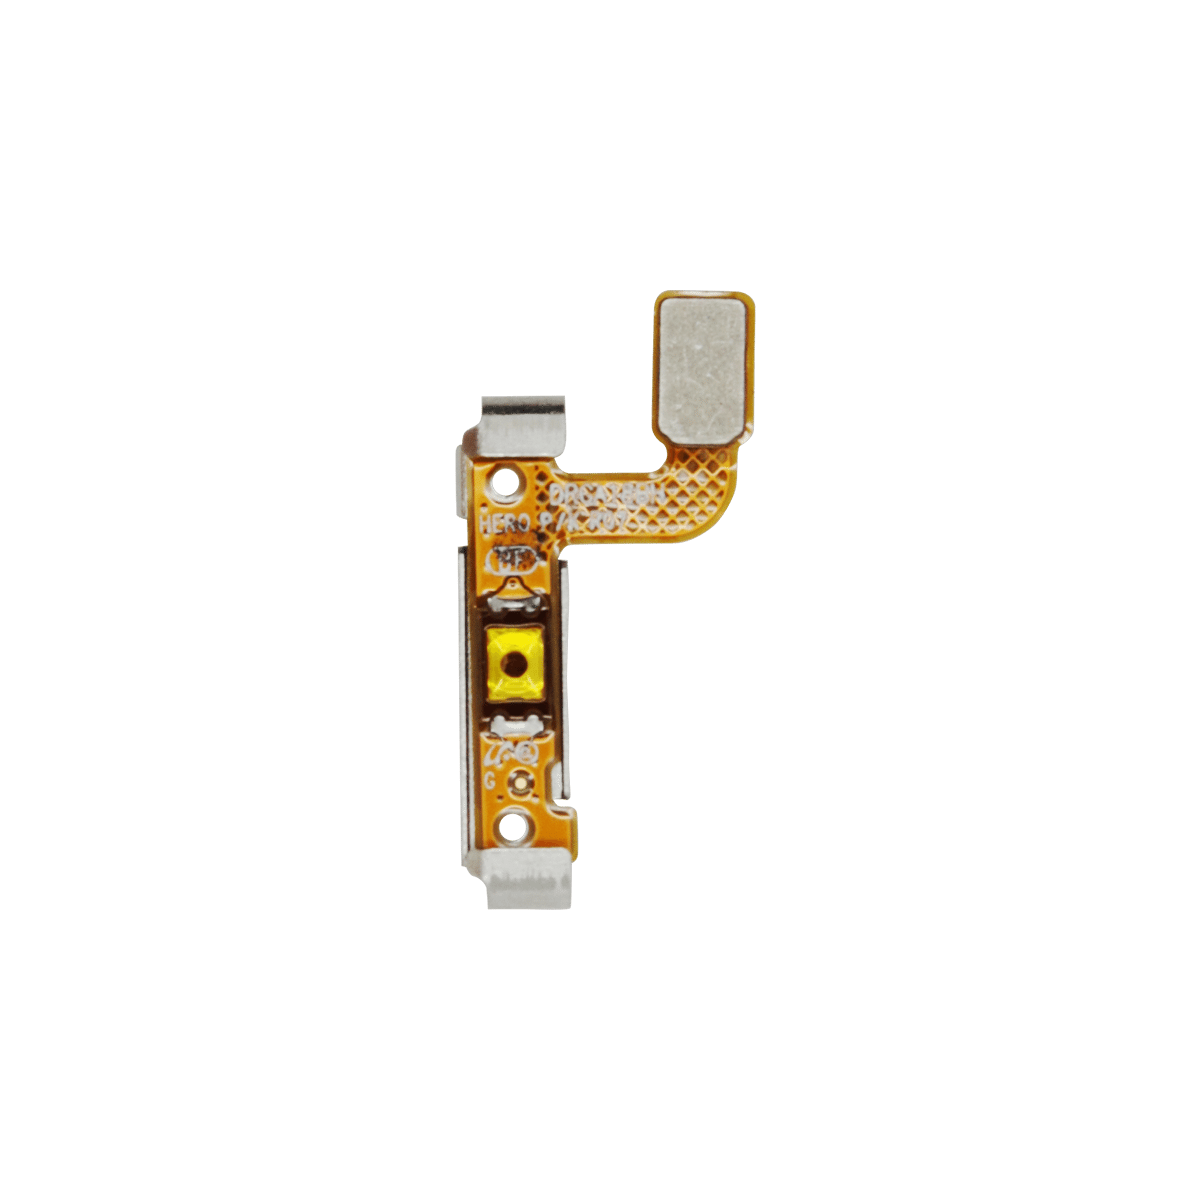 Samsung Galaxy S7 Power Button Flex Cable Replacement